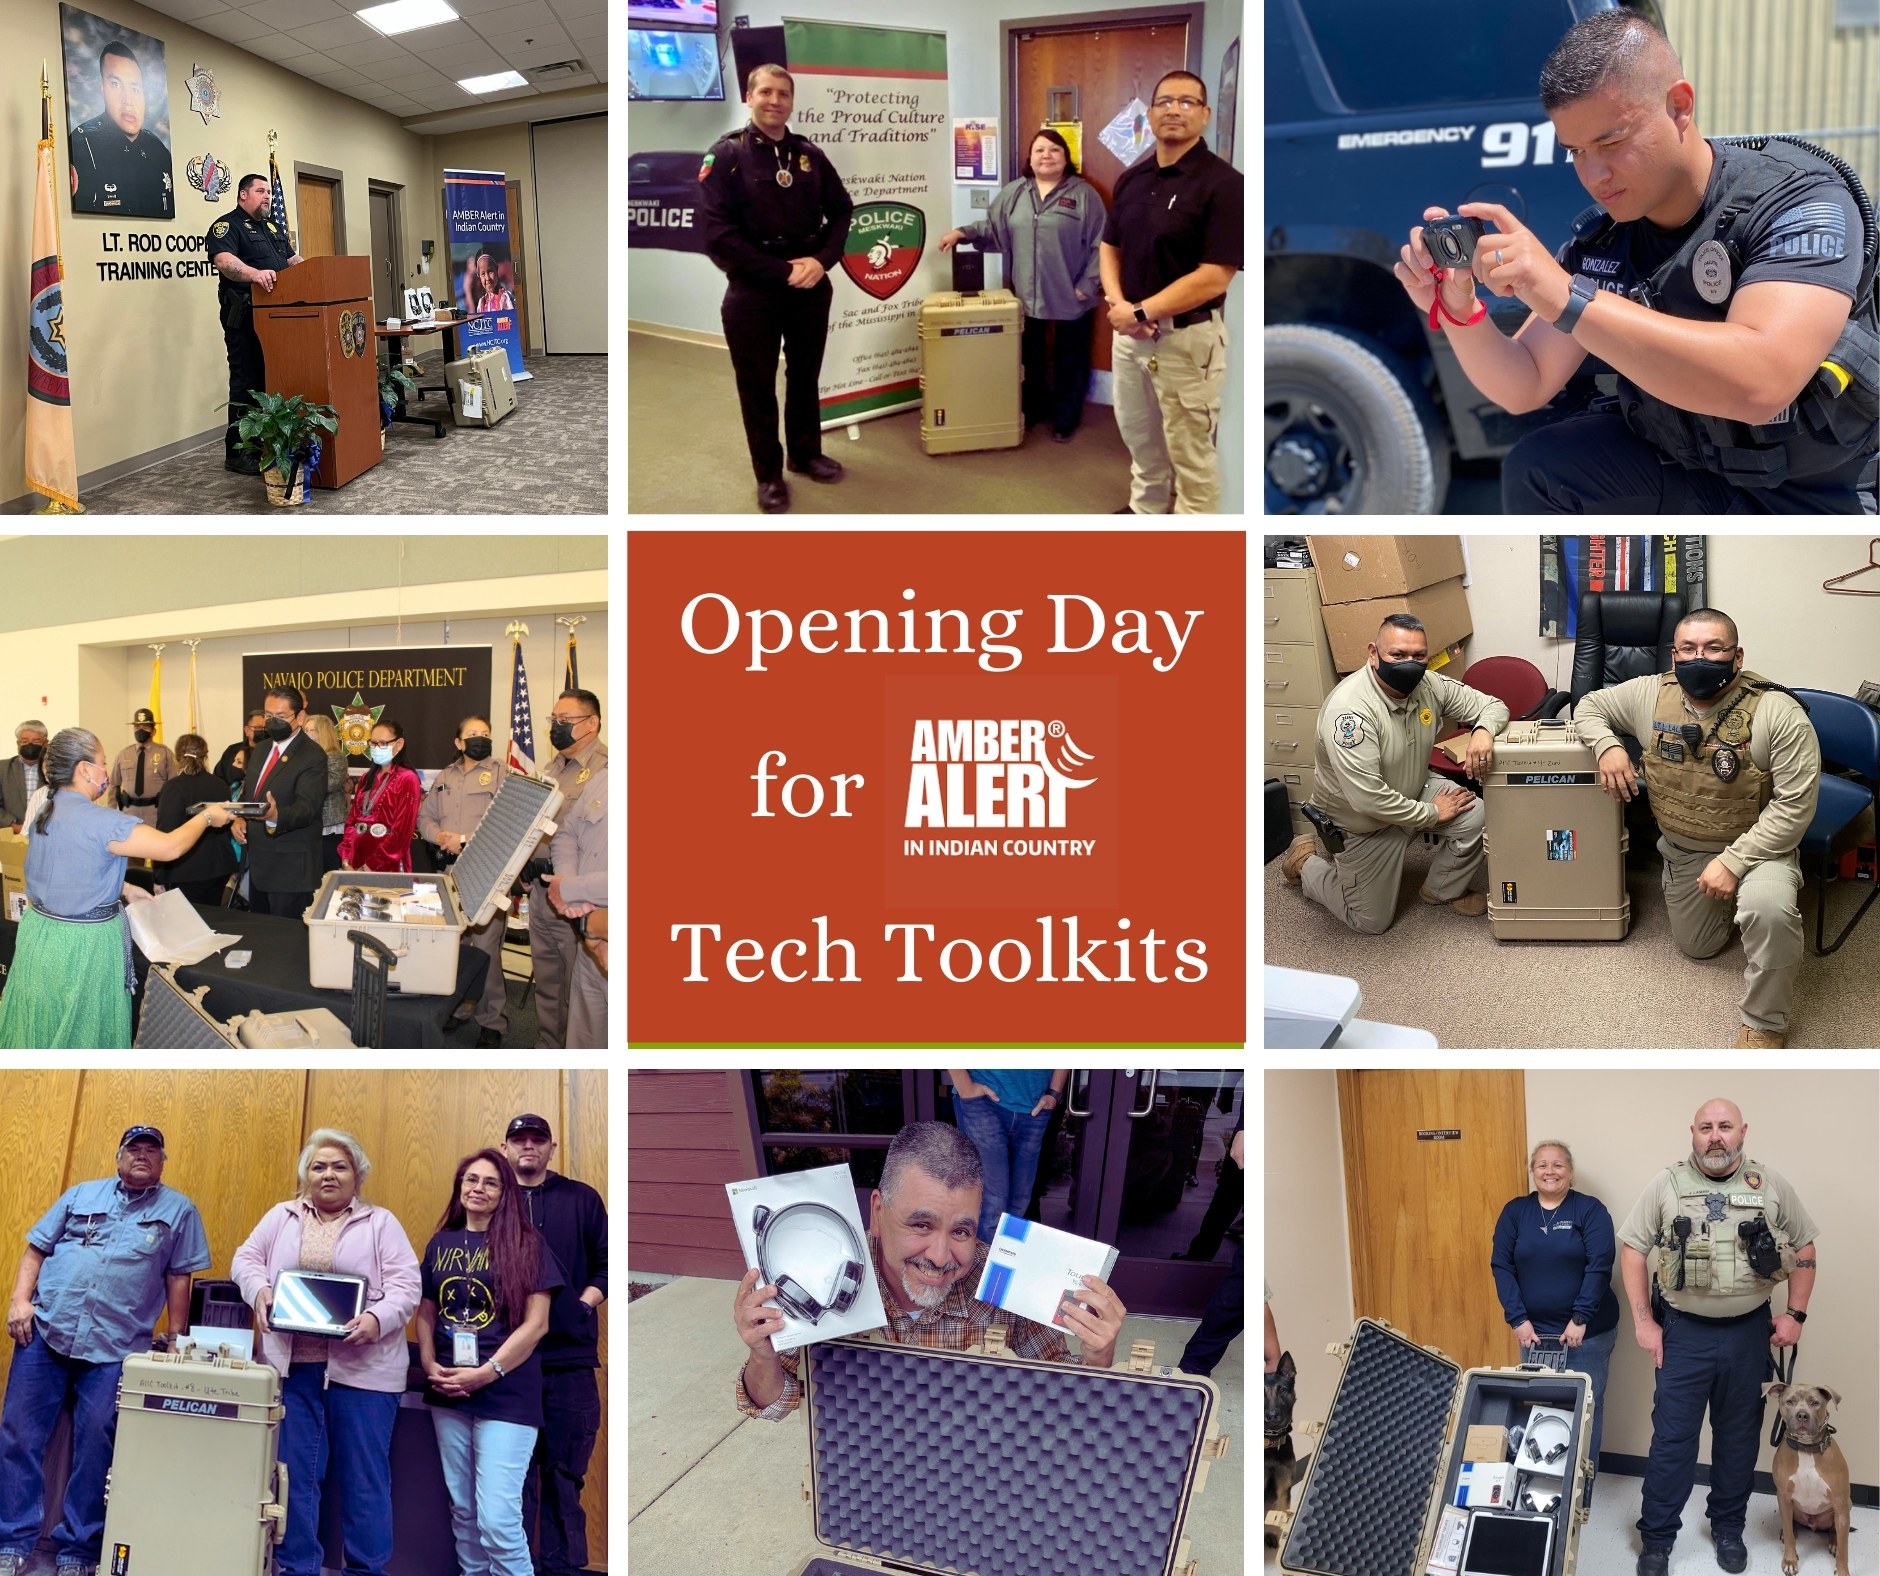 Collage of IC Toolkit Presentations and Deliveries